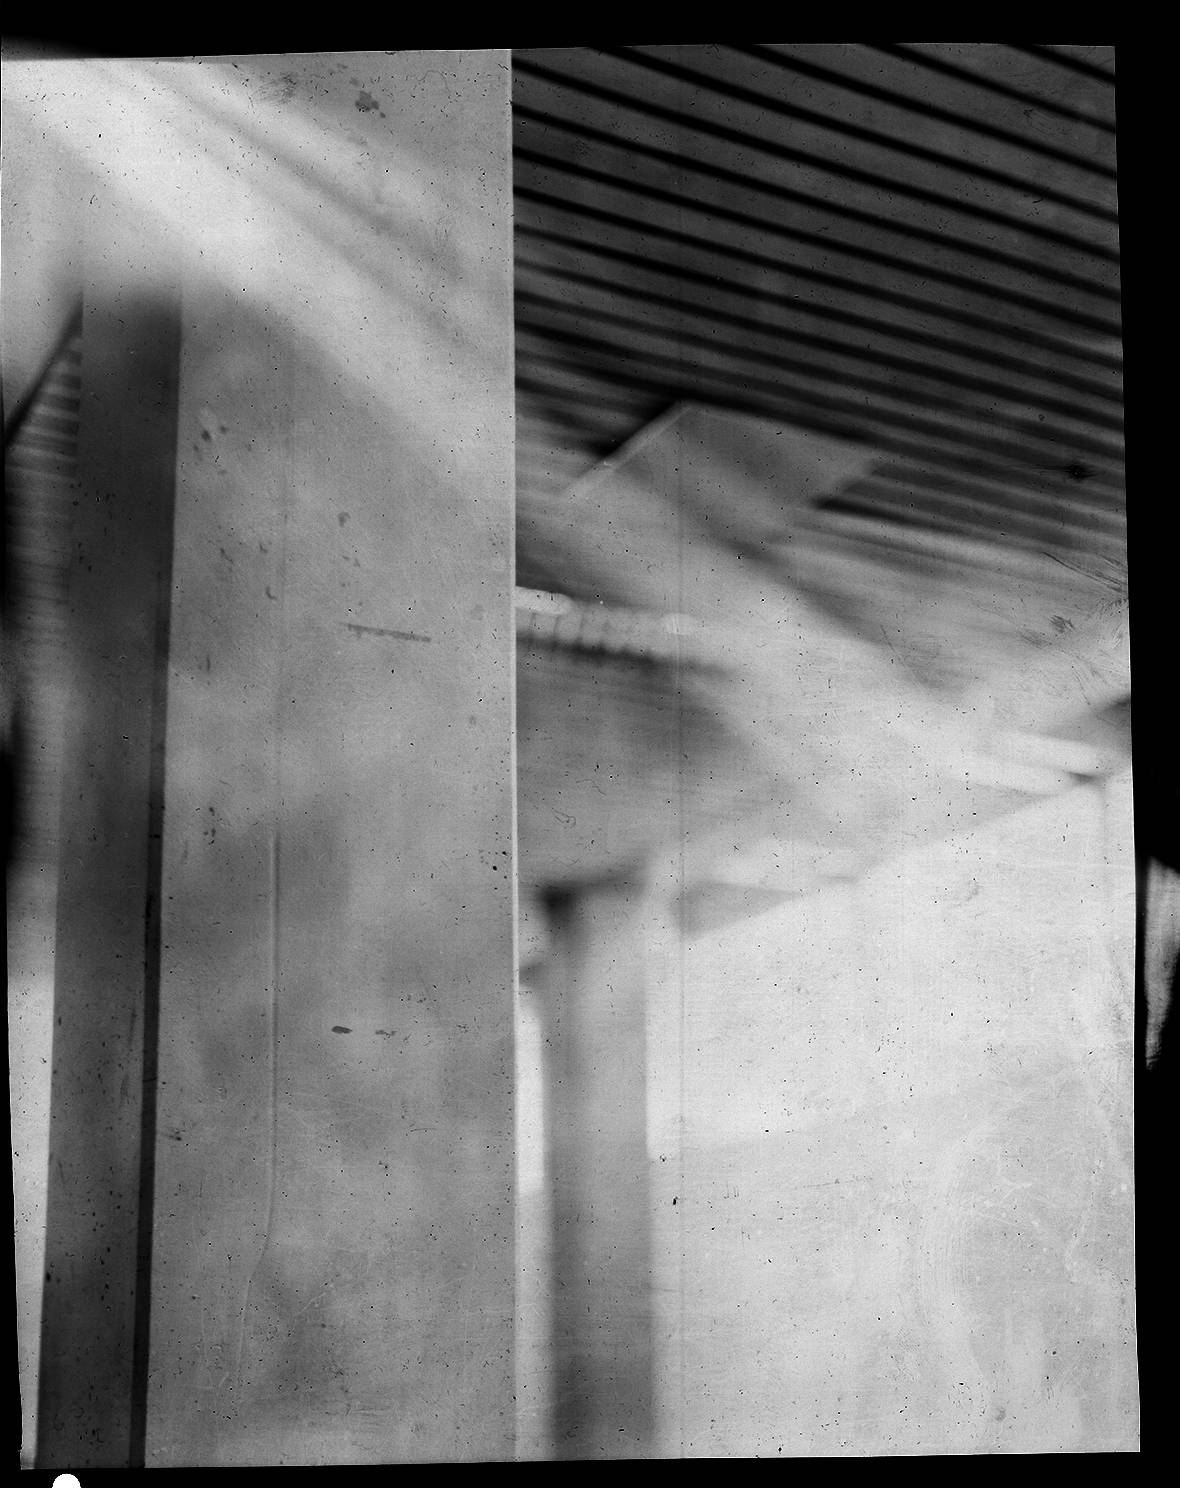 concrete column inside a building in high contrast analog black and white